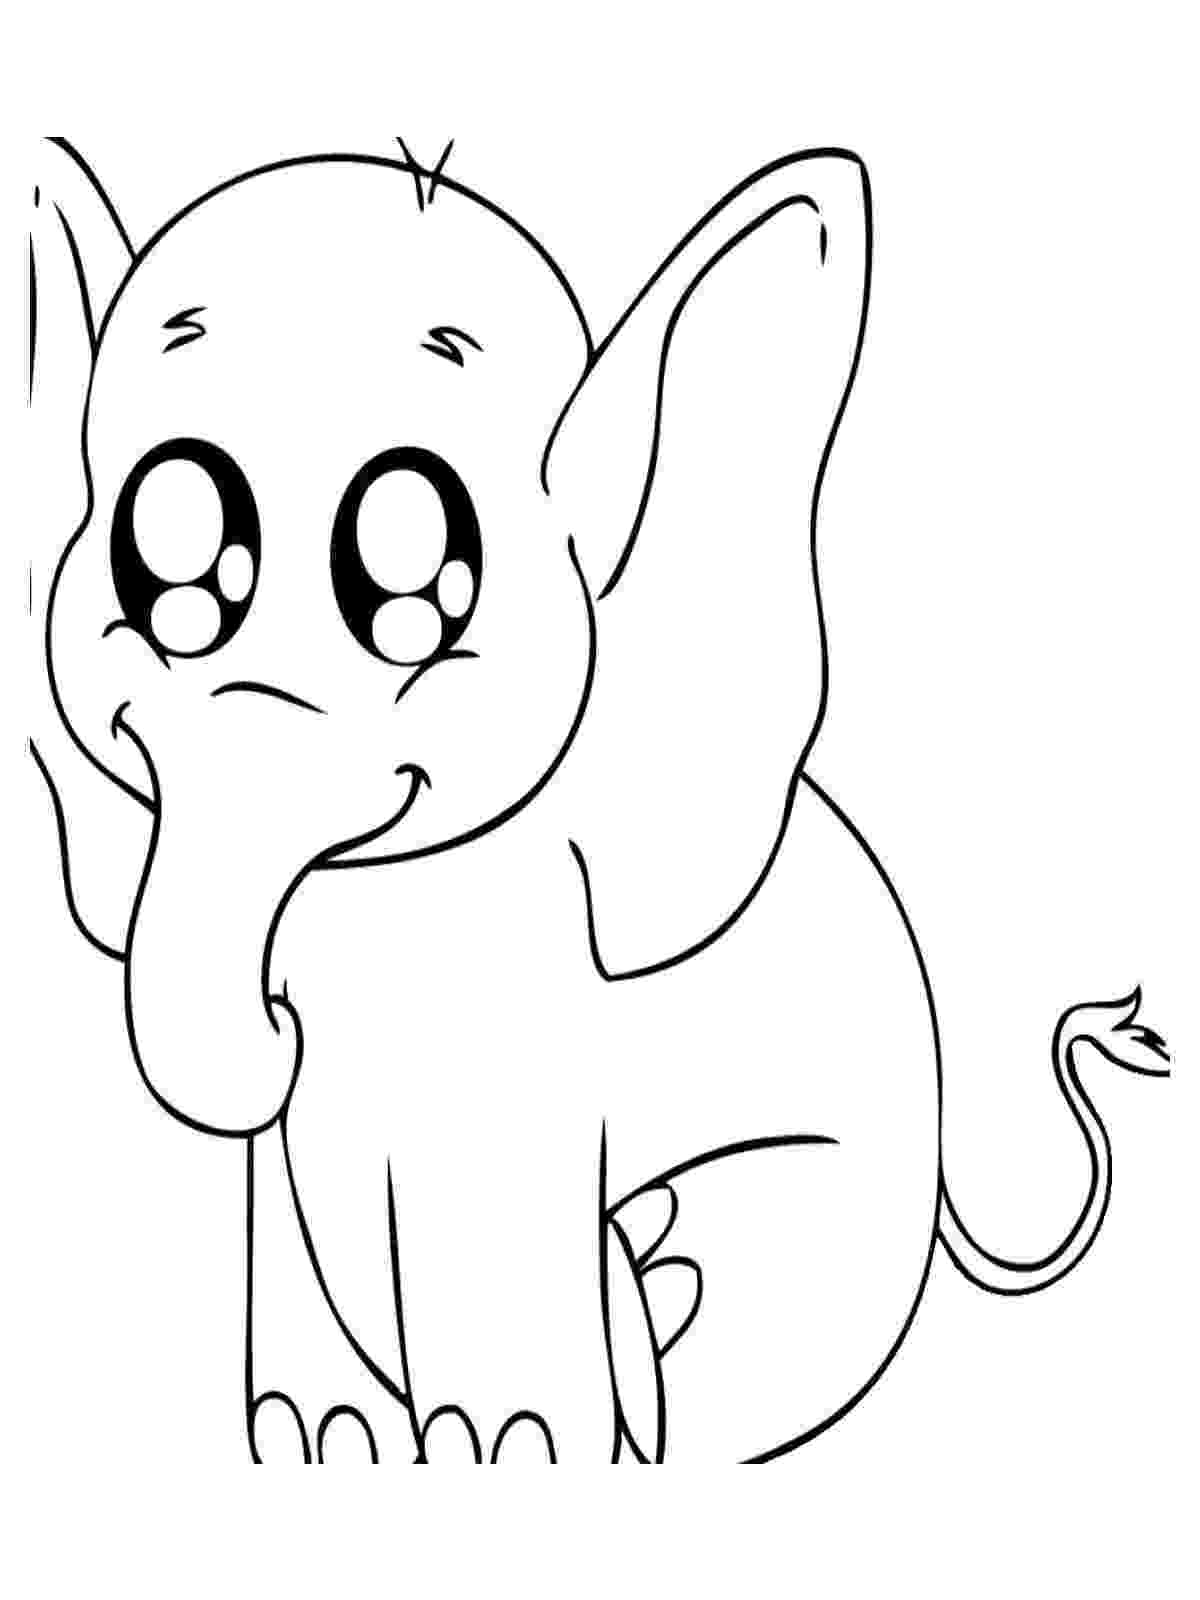 elephant color sheet baby elephant coloring pages to download and print for free elephant color sheet 